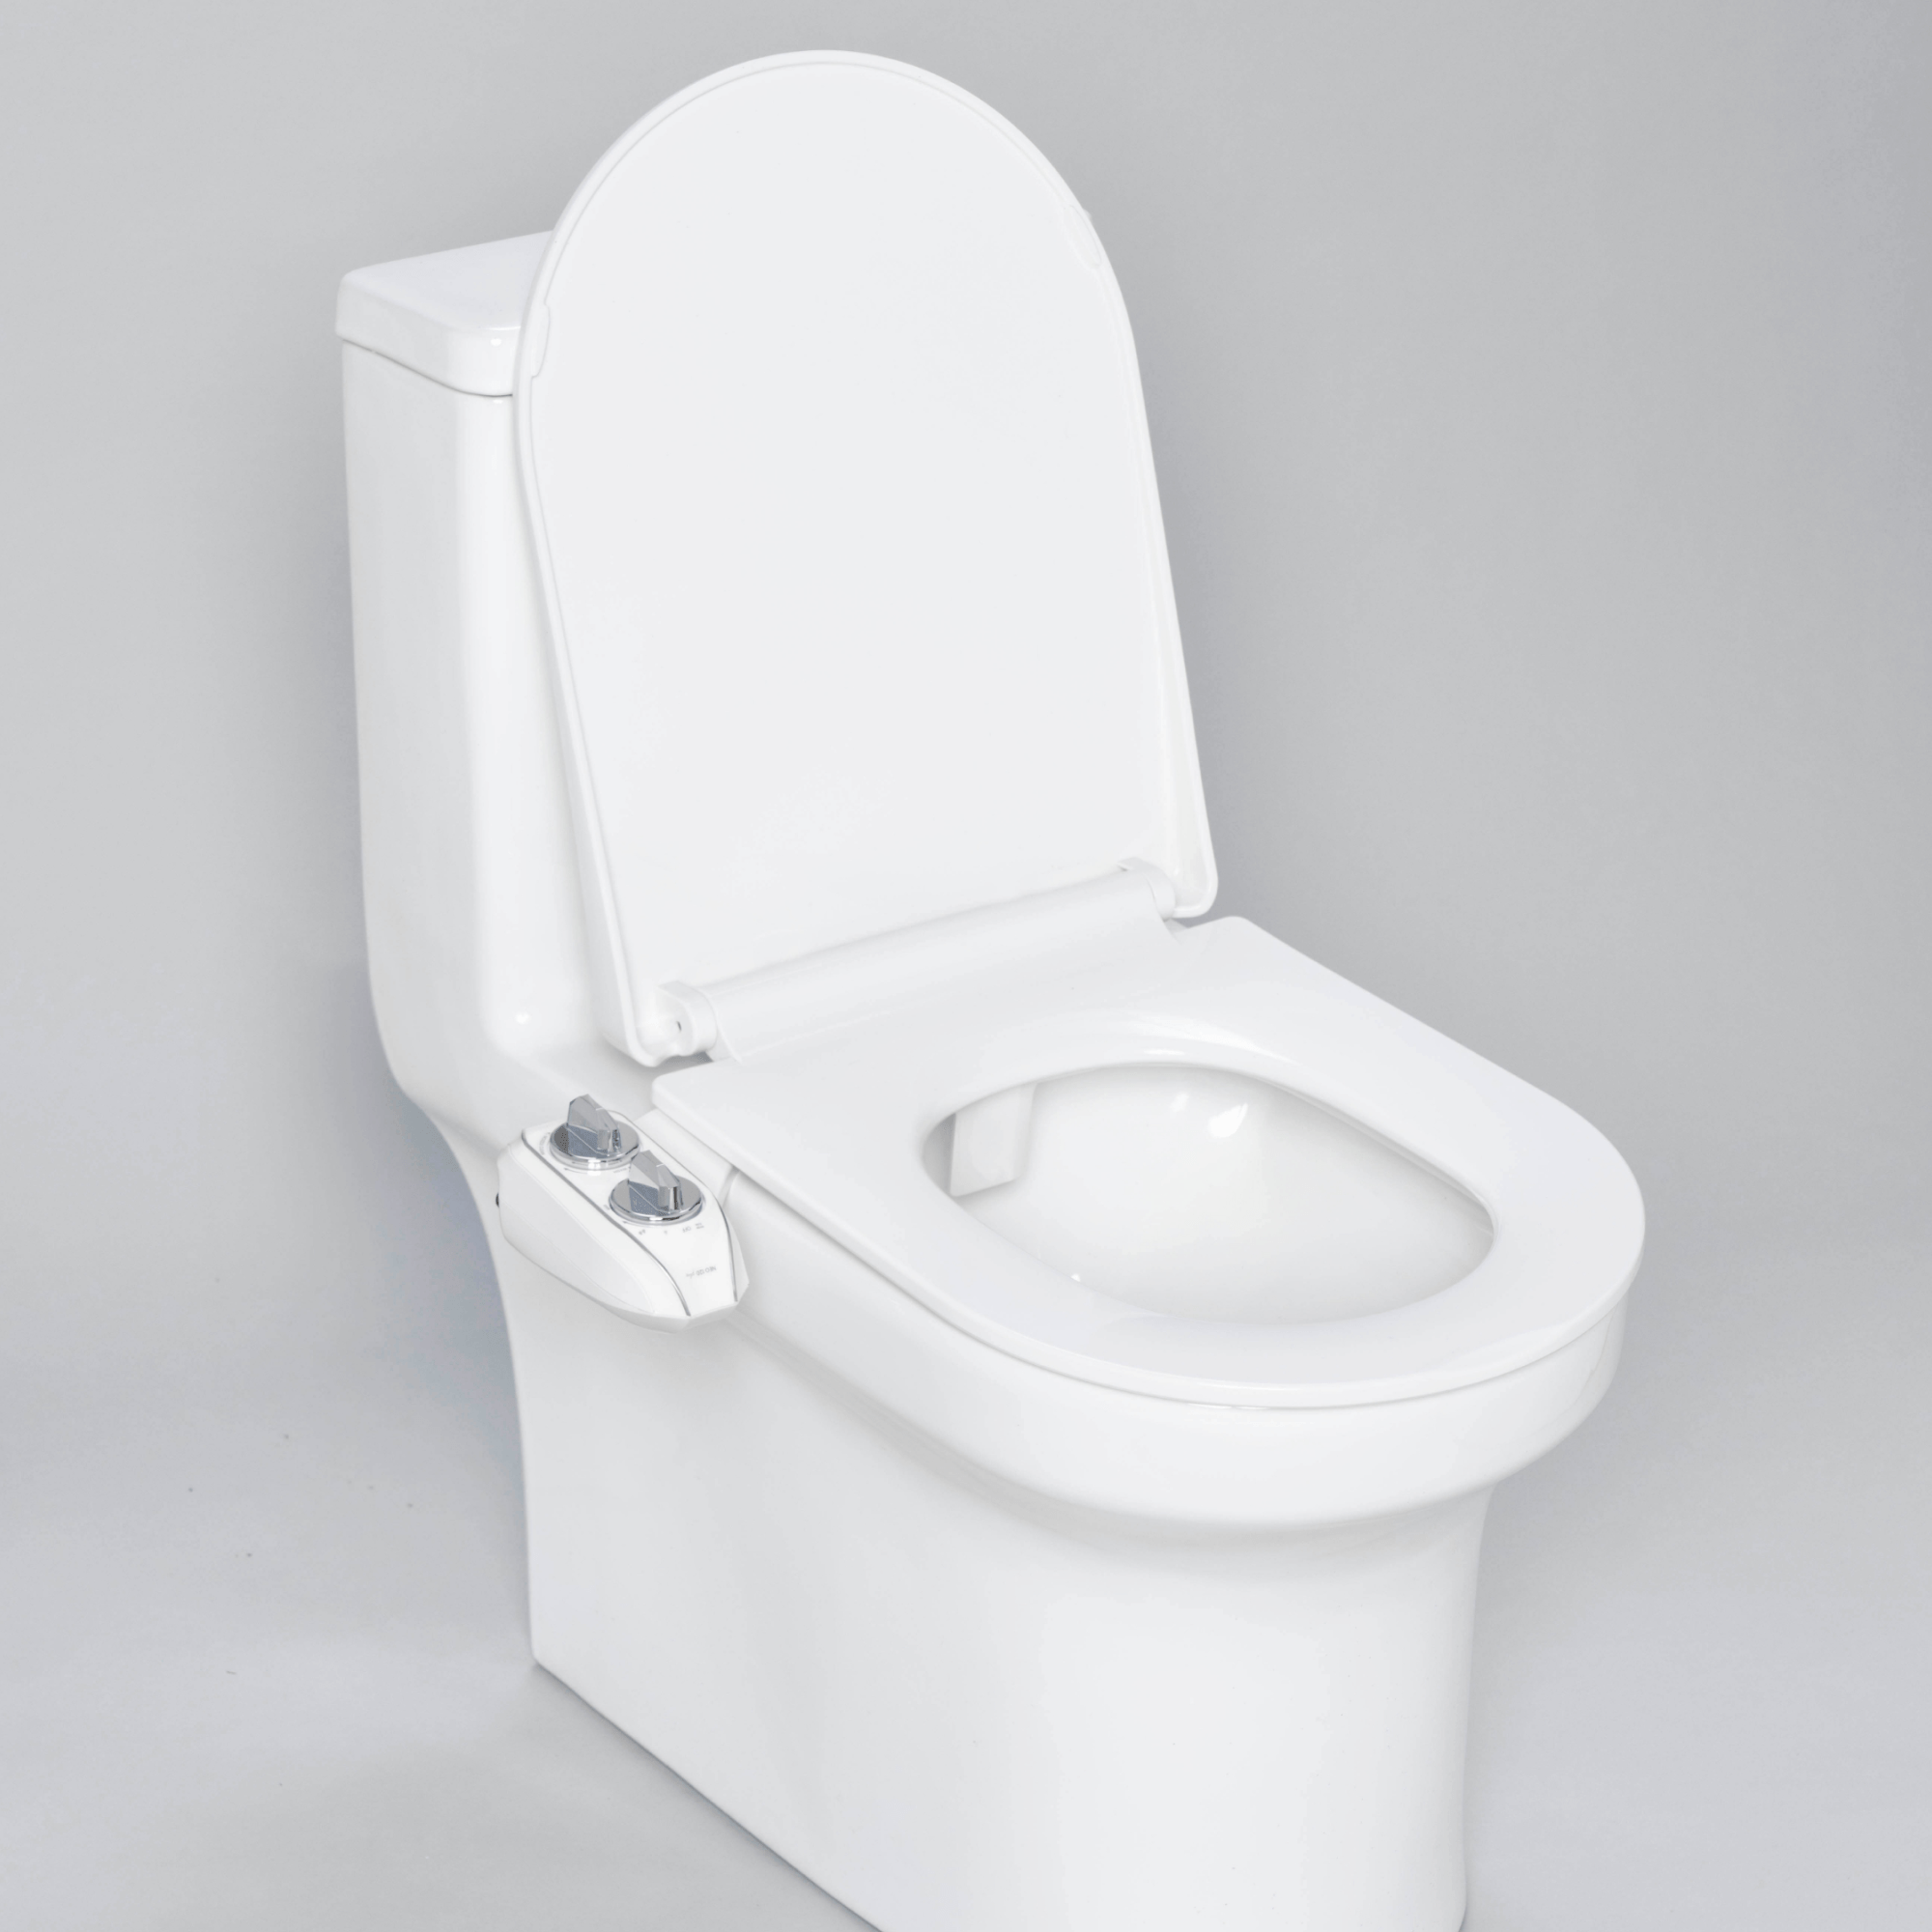 NEO 120 Plus: Imperfect Packaging - NEO 120 Plus Chrome installed on a modern toilet, with lid open